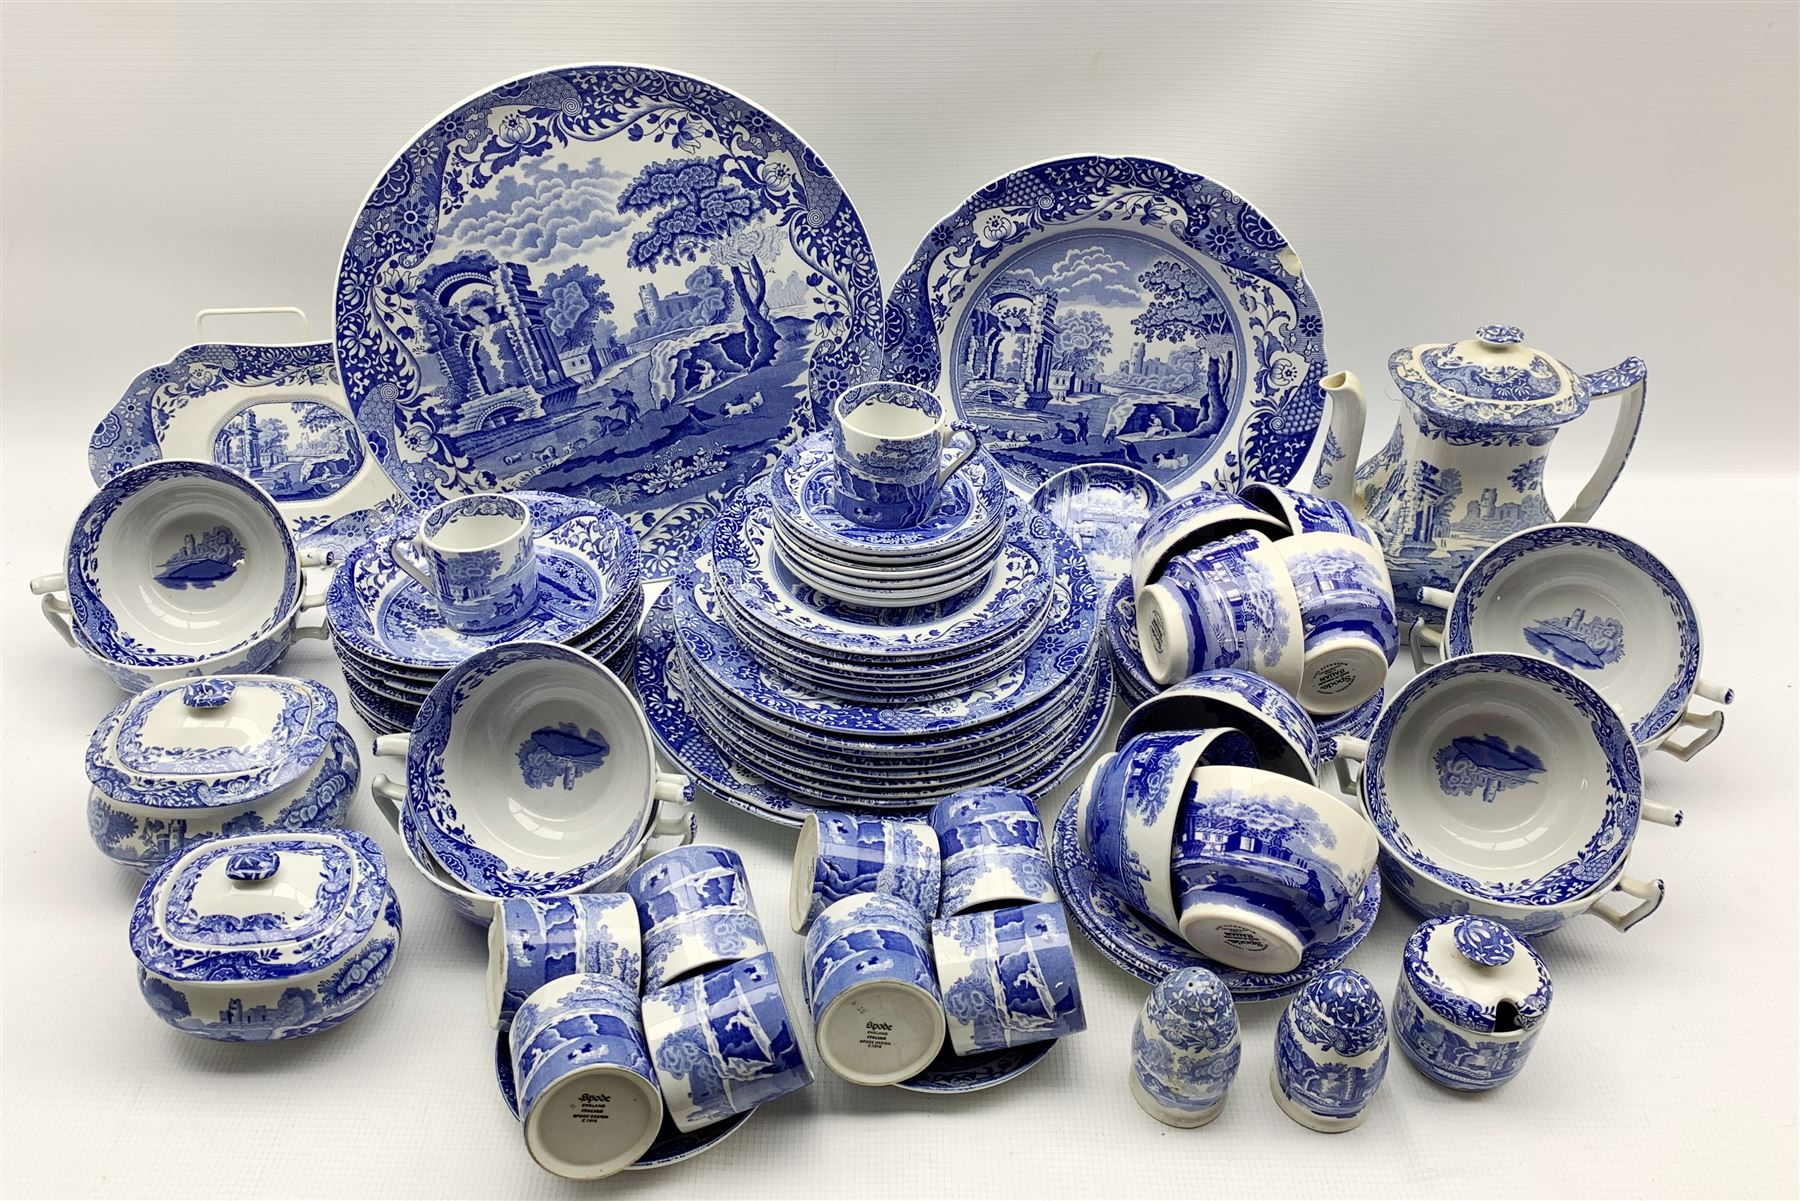 Collection of Copeland Spode Italian pattern blue and white table ware for dinner